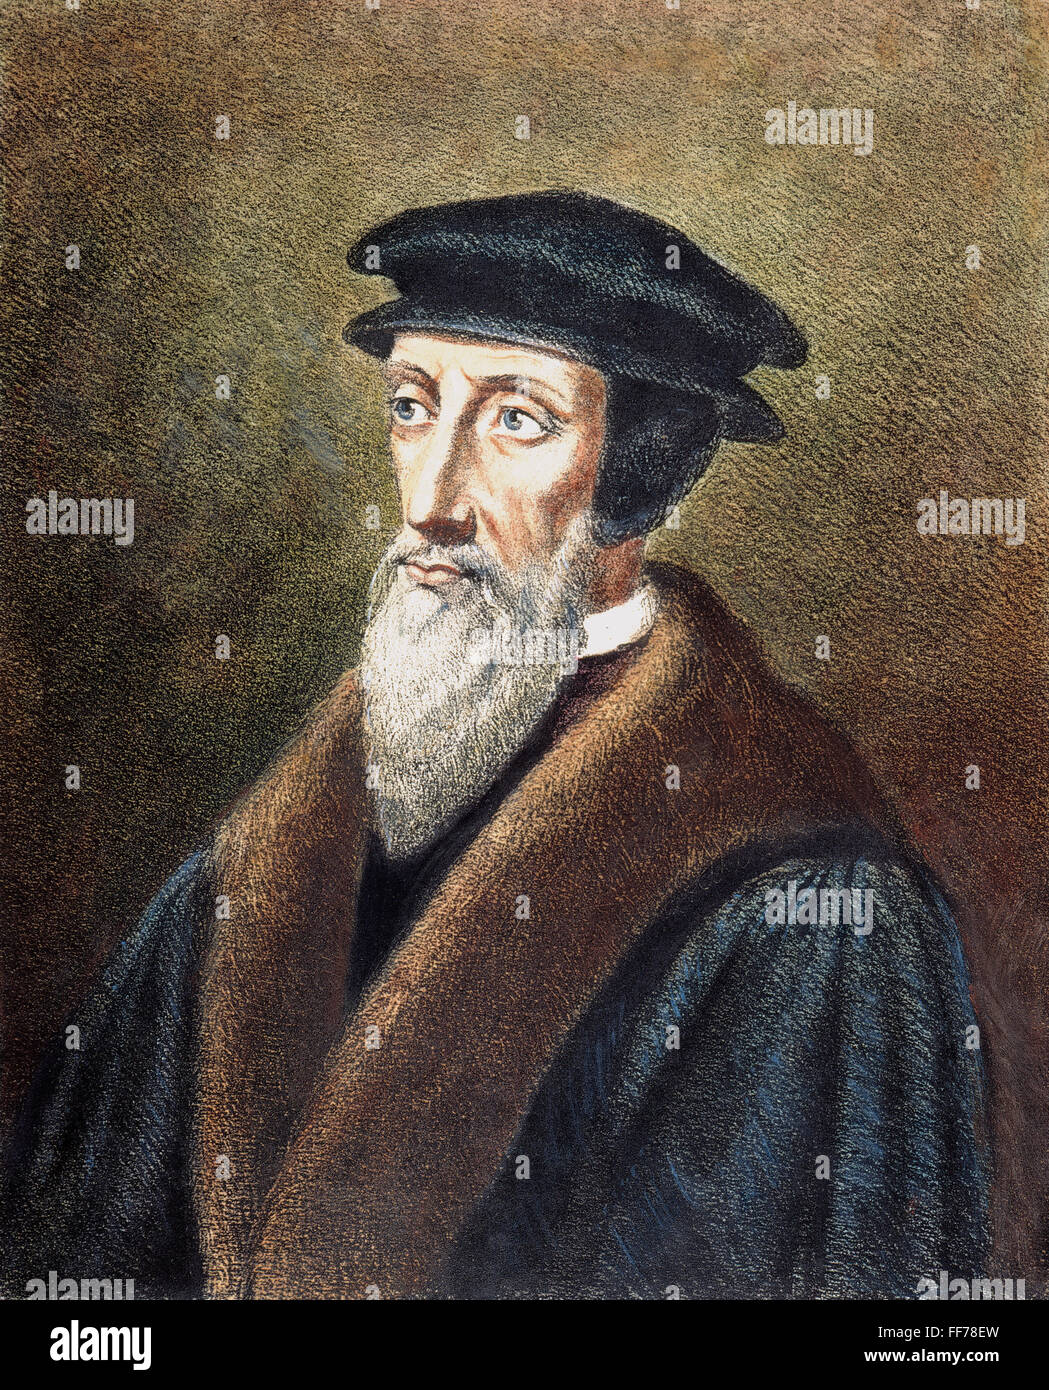 JOHN CALVIN (1509-1564). /nFrench theologian and reformer. Colored lithograph, 19th century. Stock Photo